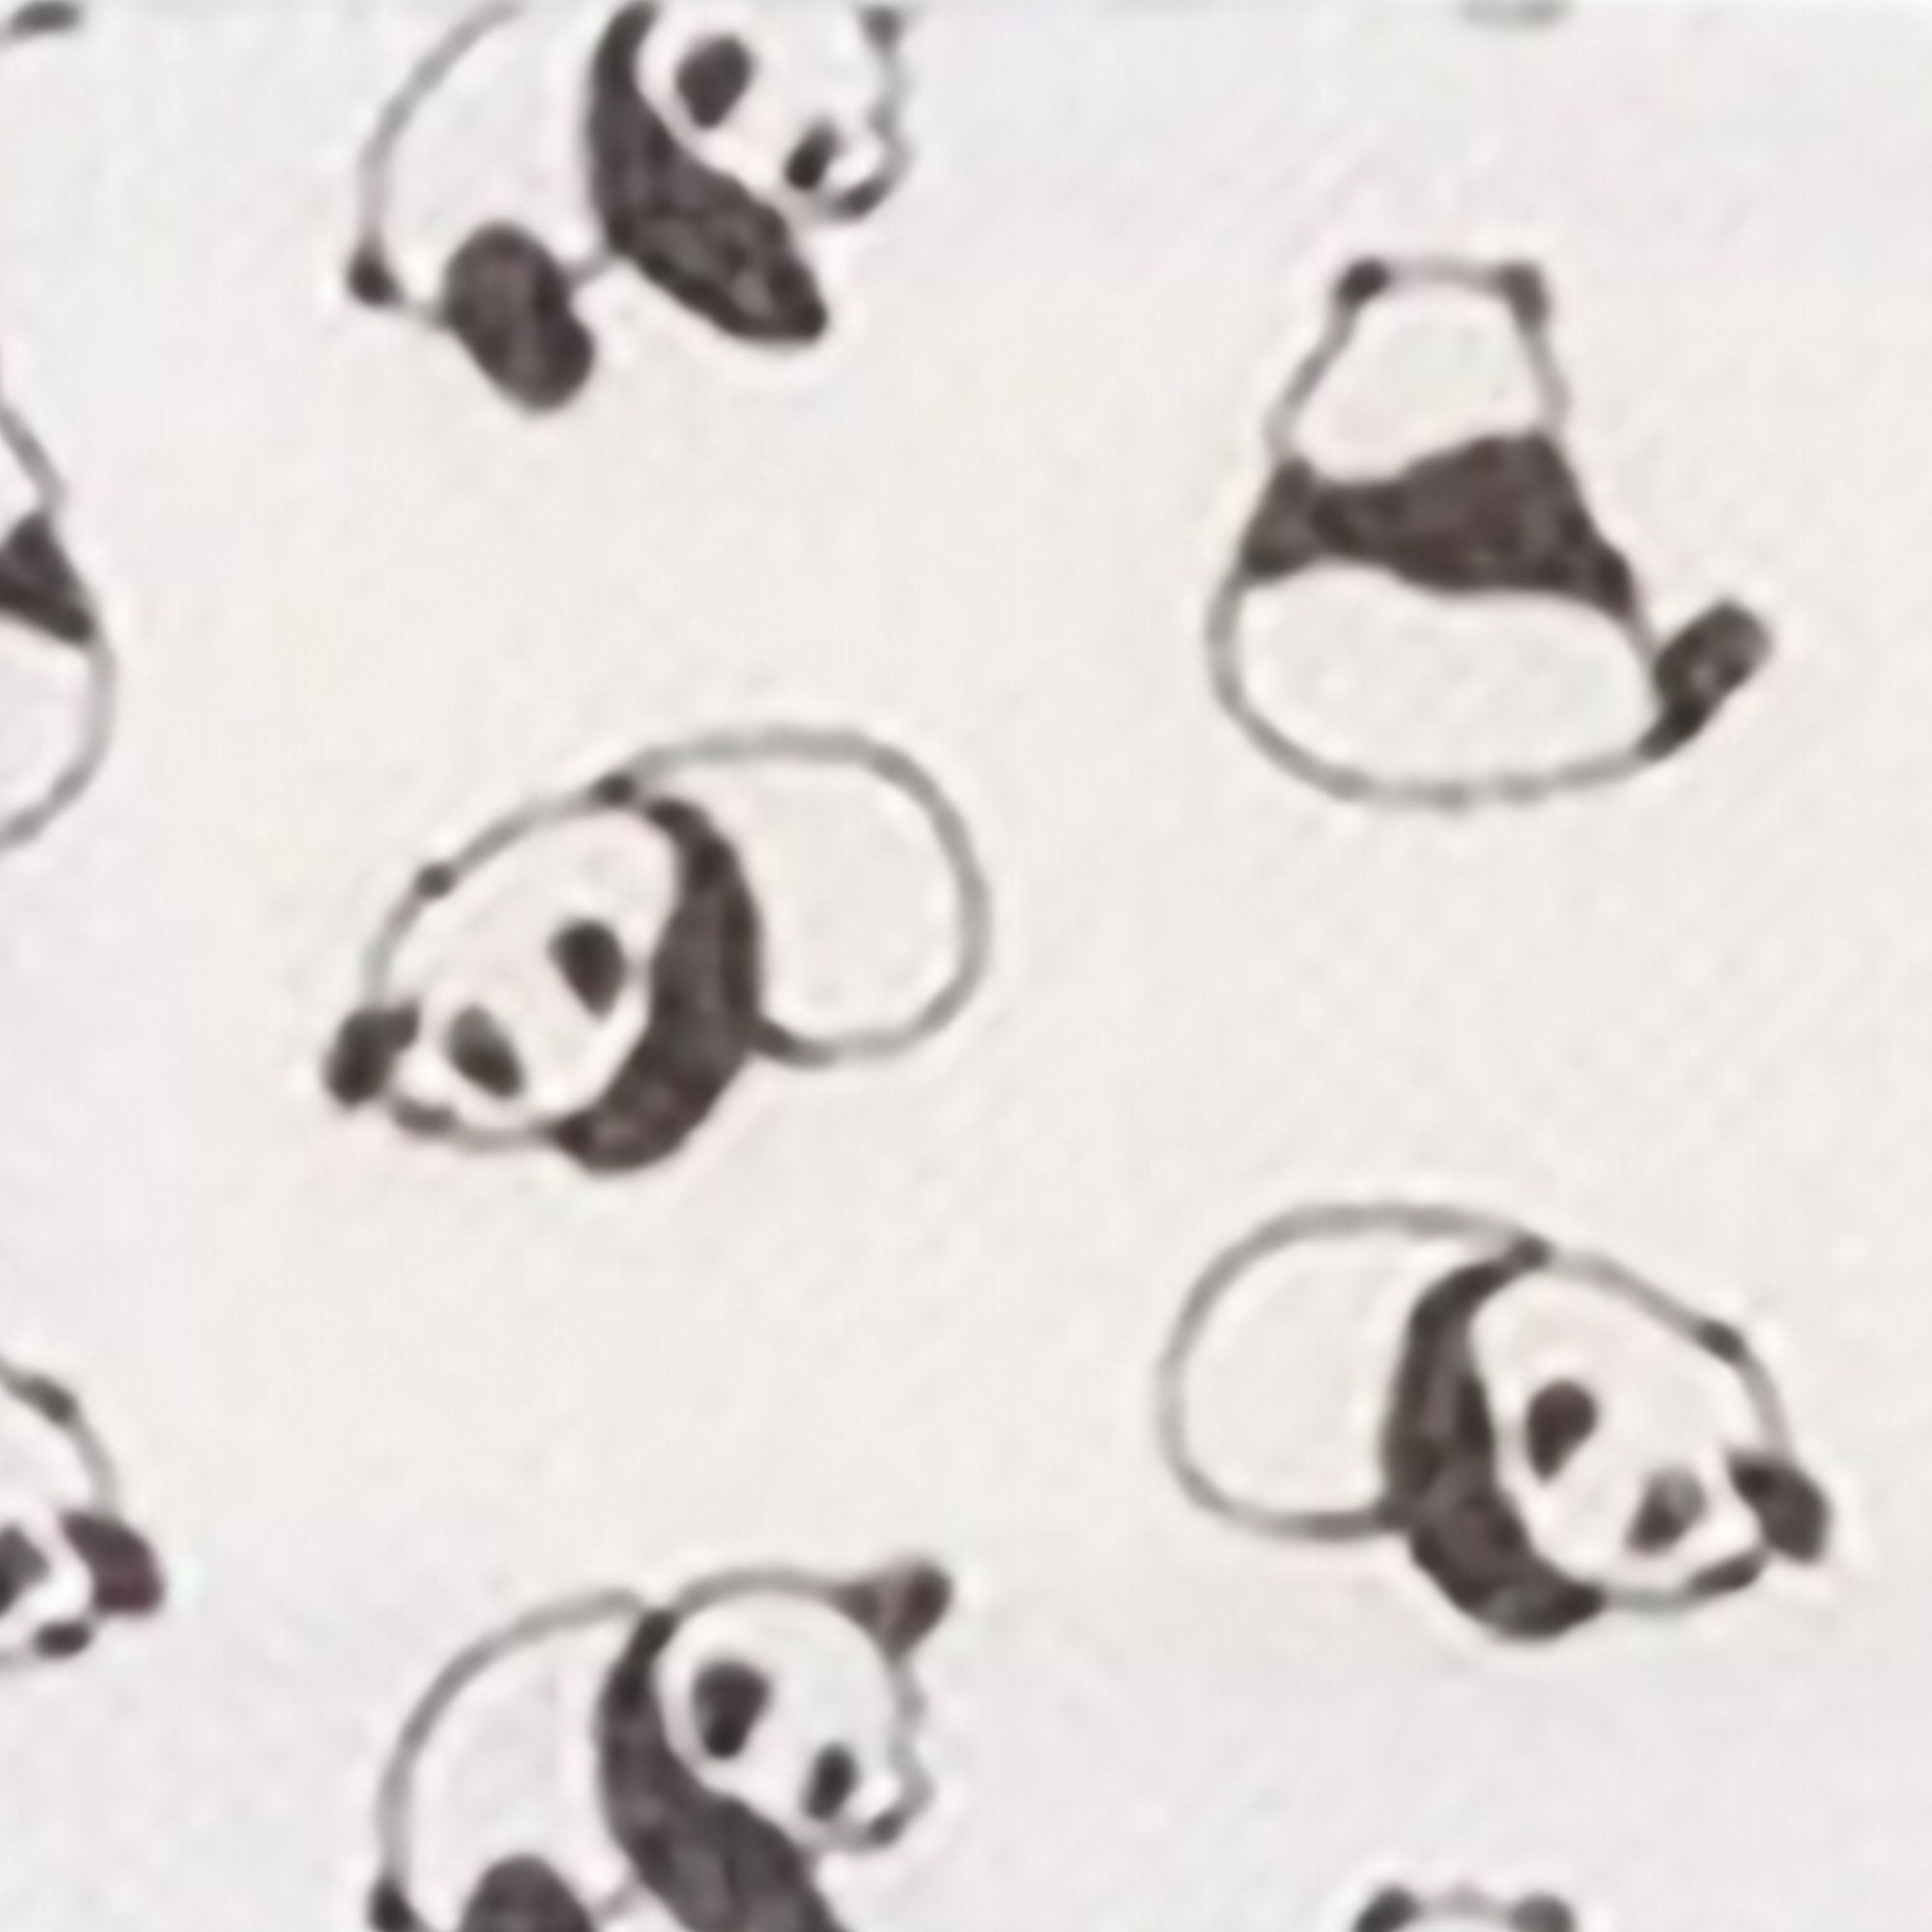 Adhesive Strip Patch™ Kids On The Go Pack 3/4 X 3 Inch Bamboo / Coconut Oil Rectangle Kid Design (Panda) Sterile